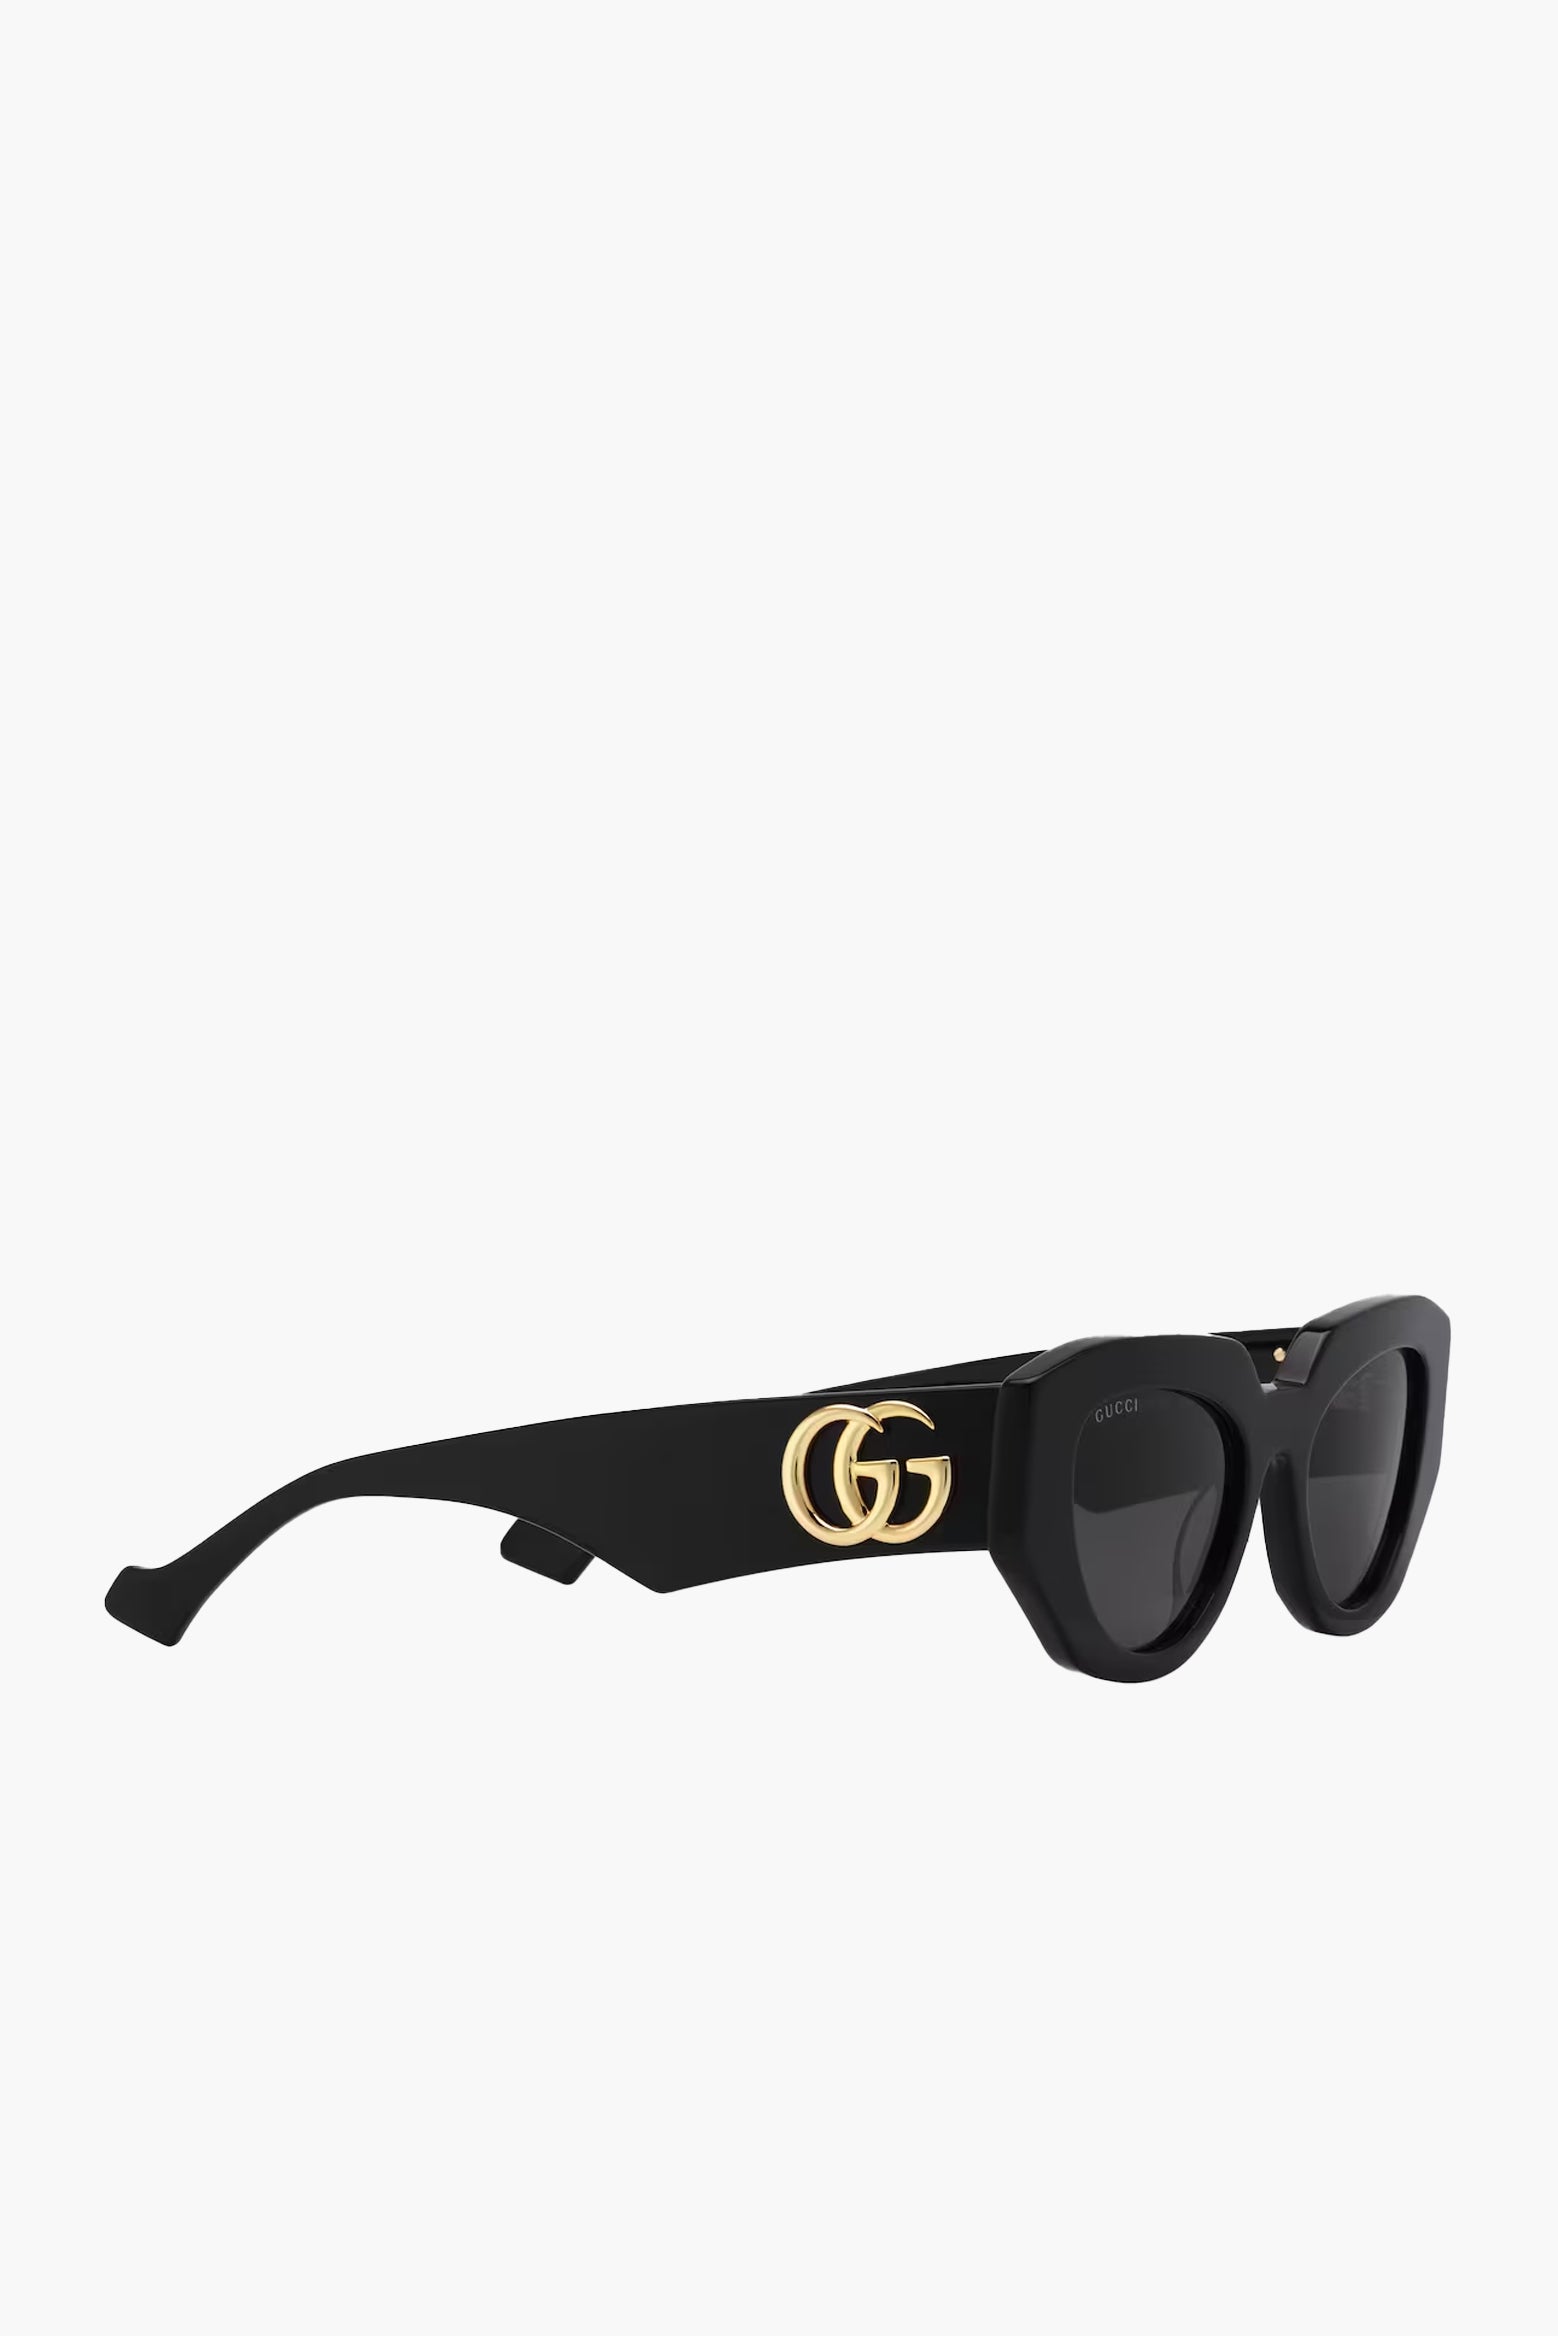 Gucci Geometric Frame Sunglasses in Black available at The New Trend Australia.